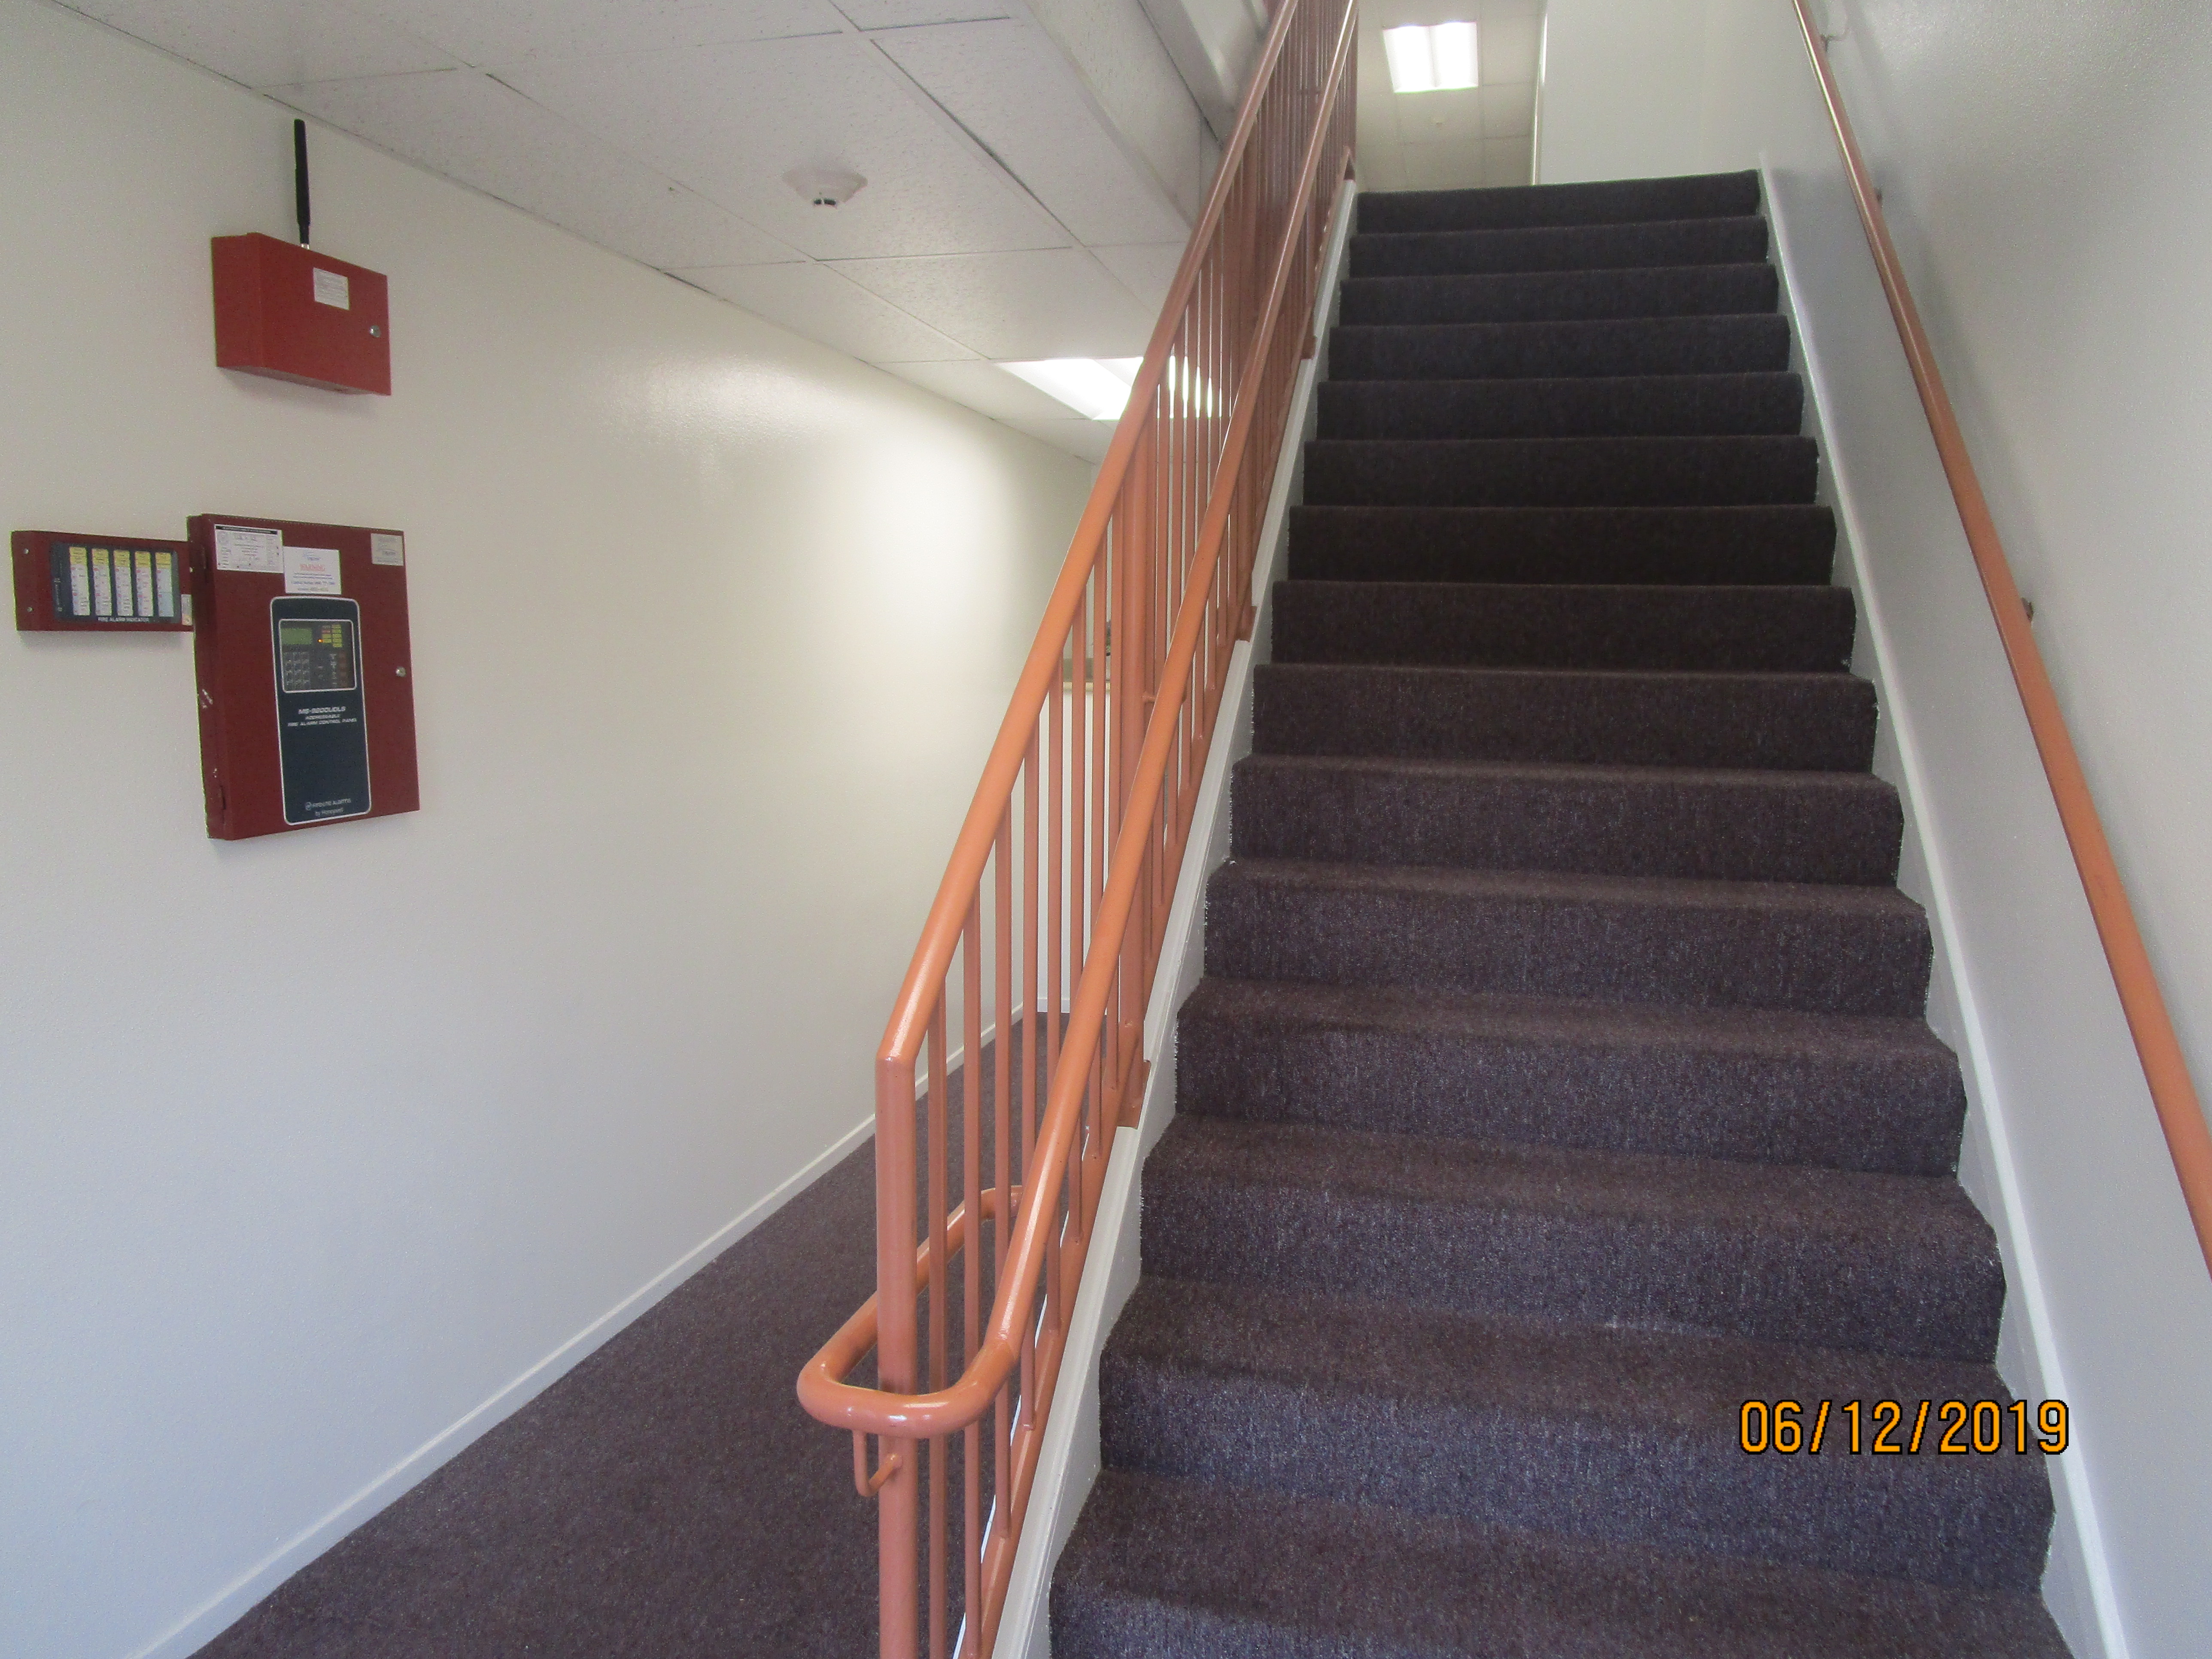 Front view of a brown carpet stairways with handrails on each side.